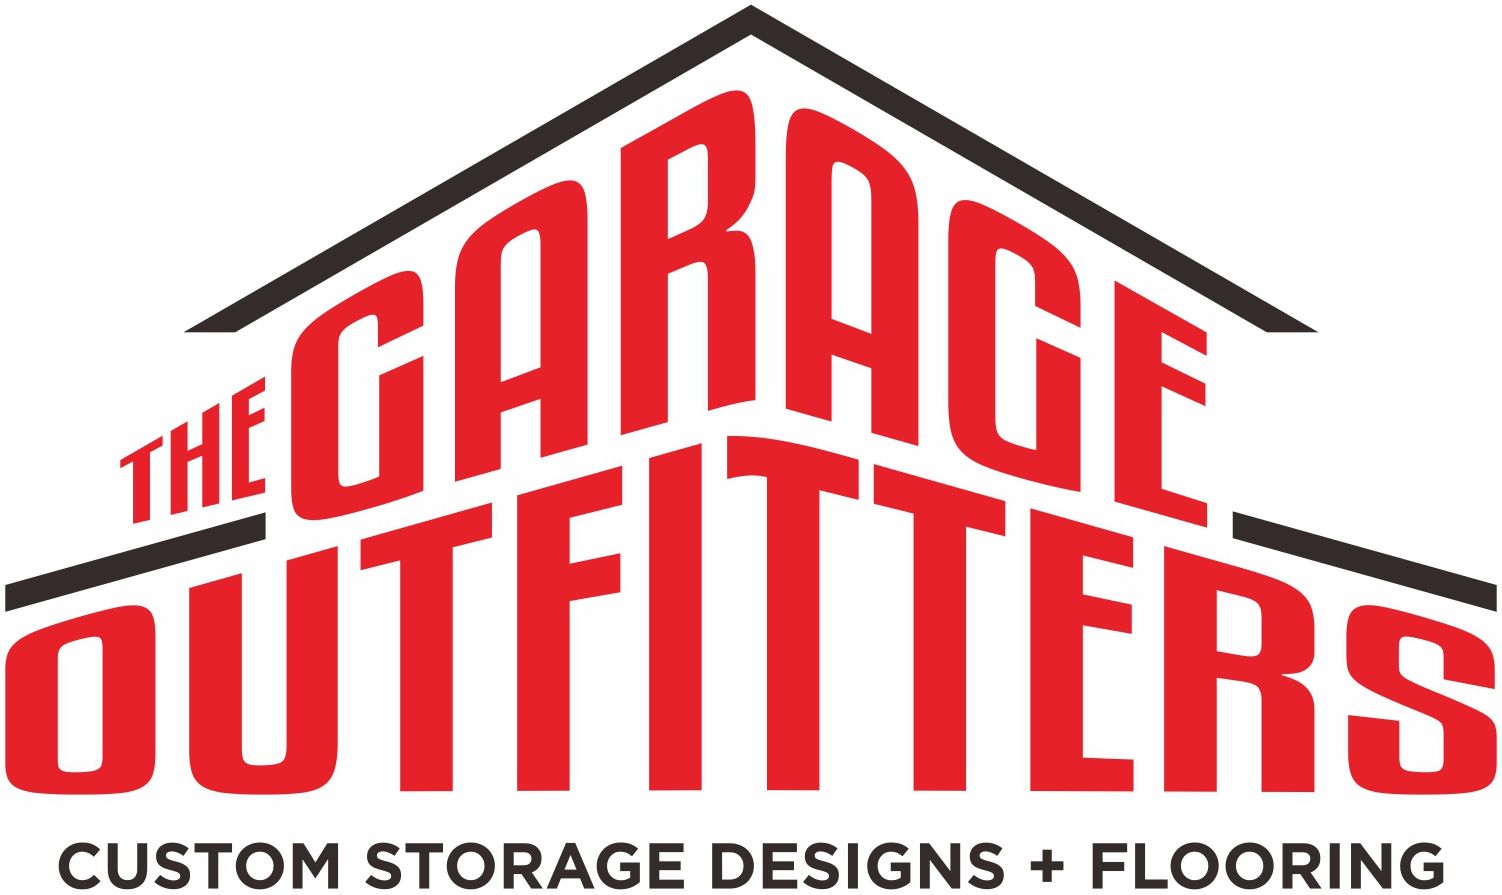 The Garage Outfitters - Logo